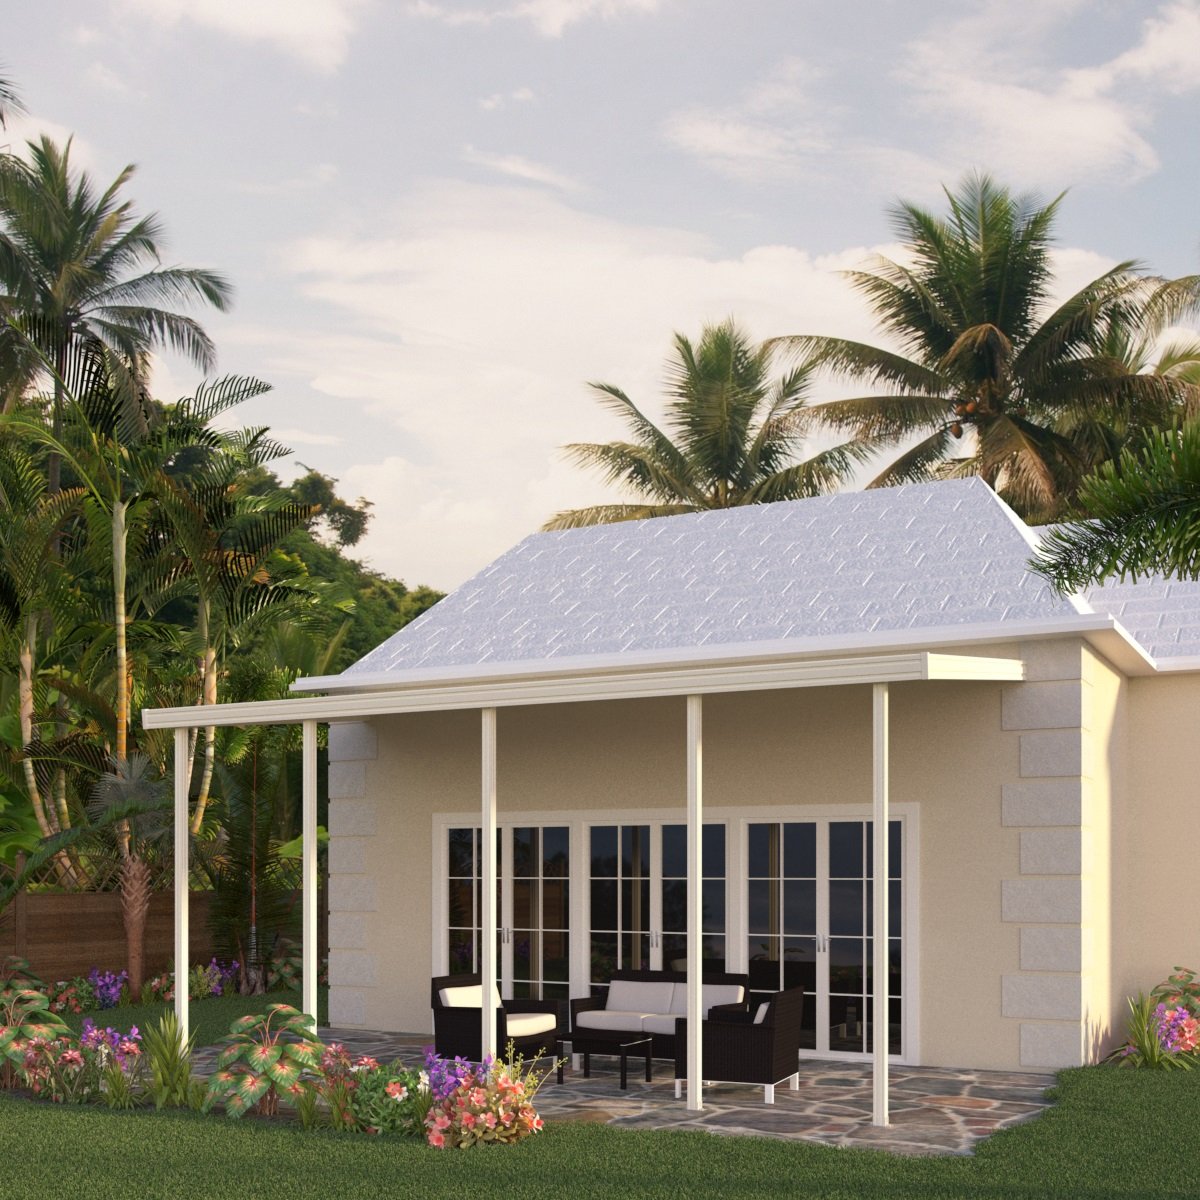 08 ft. Deep x 28 ft. Wide Ivory Attached Aluminum Patio Cover -4 Posts - (20lb Low/Medium Snow Area)